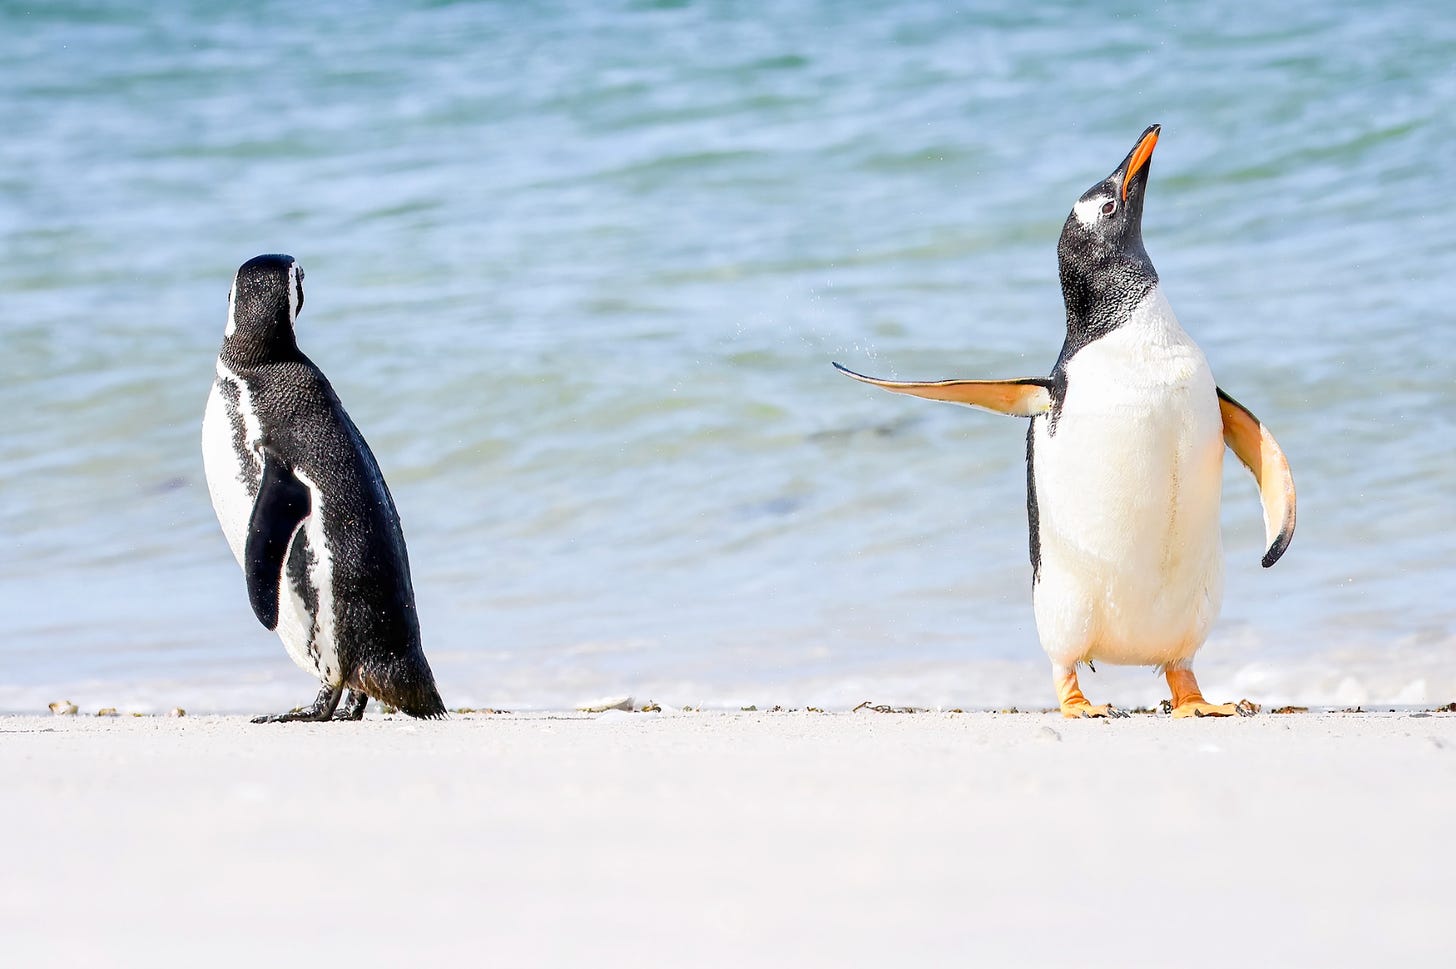 Two penguins on beach. One penguin with its fin up dramatically.